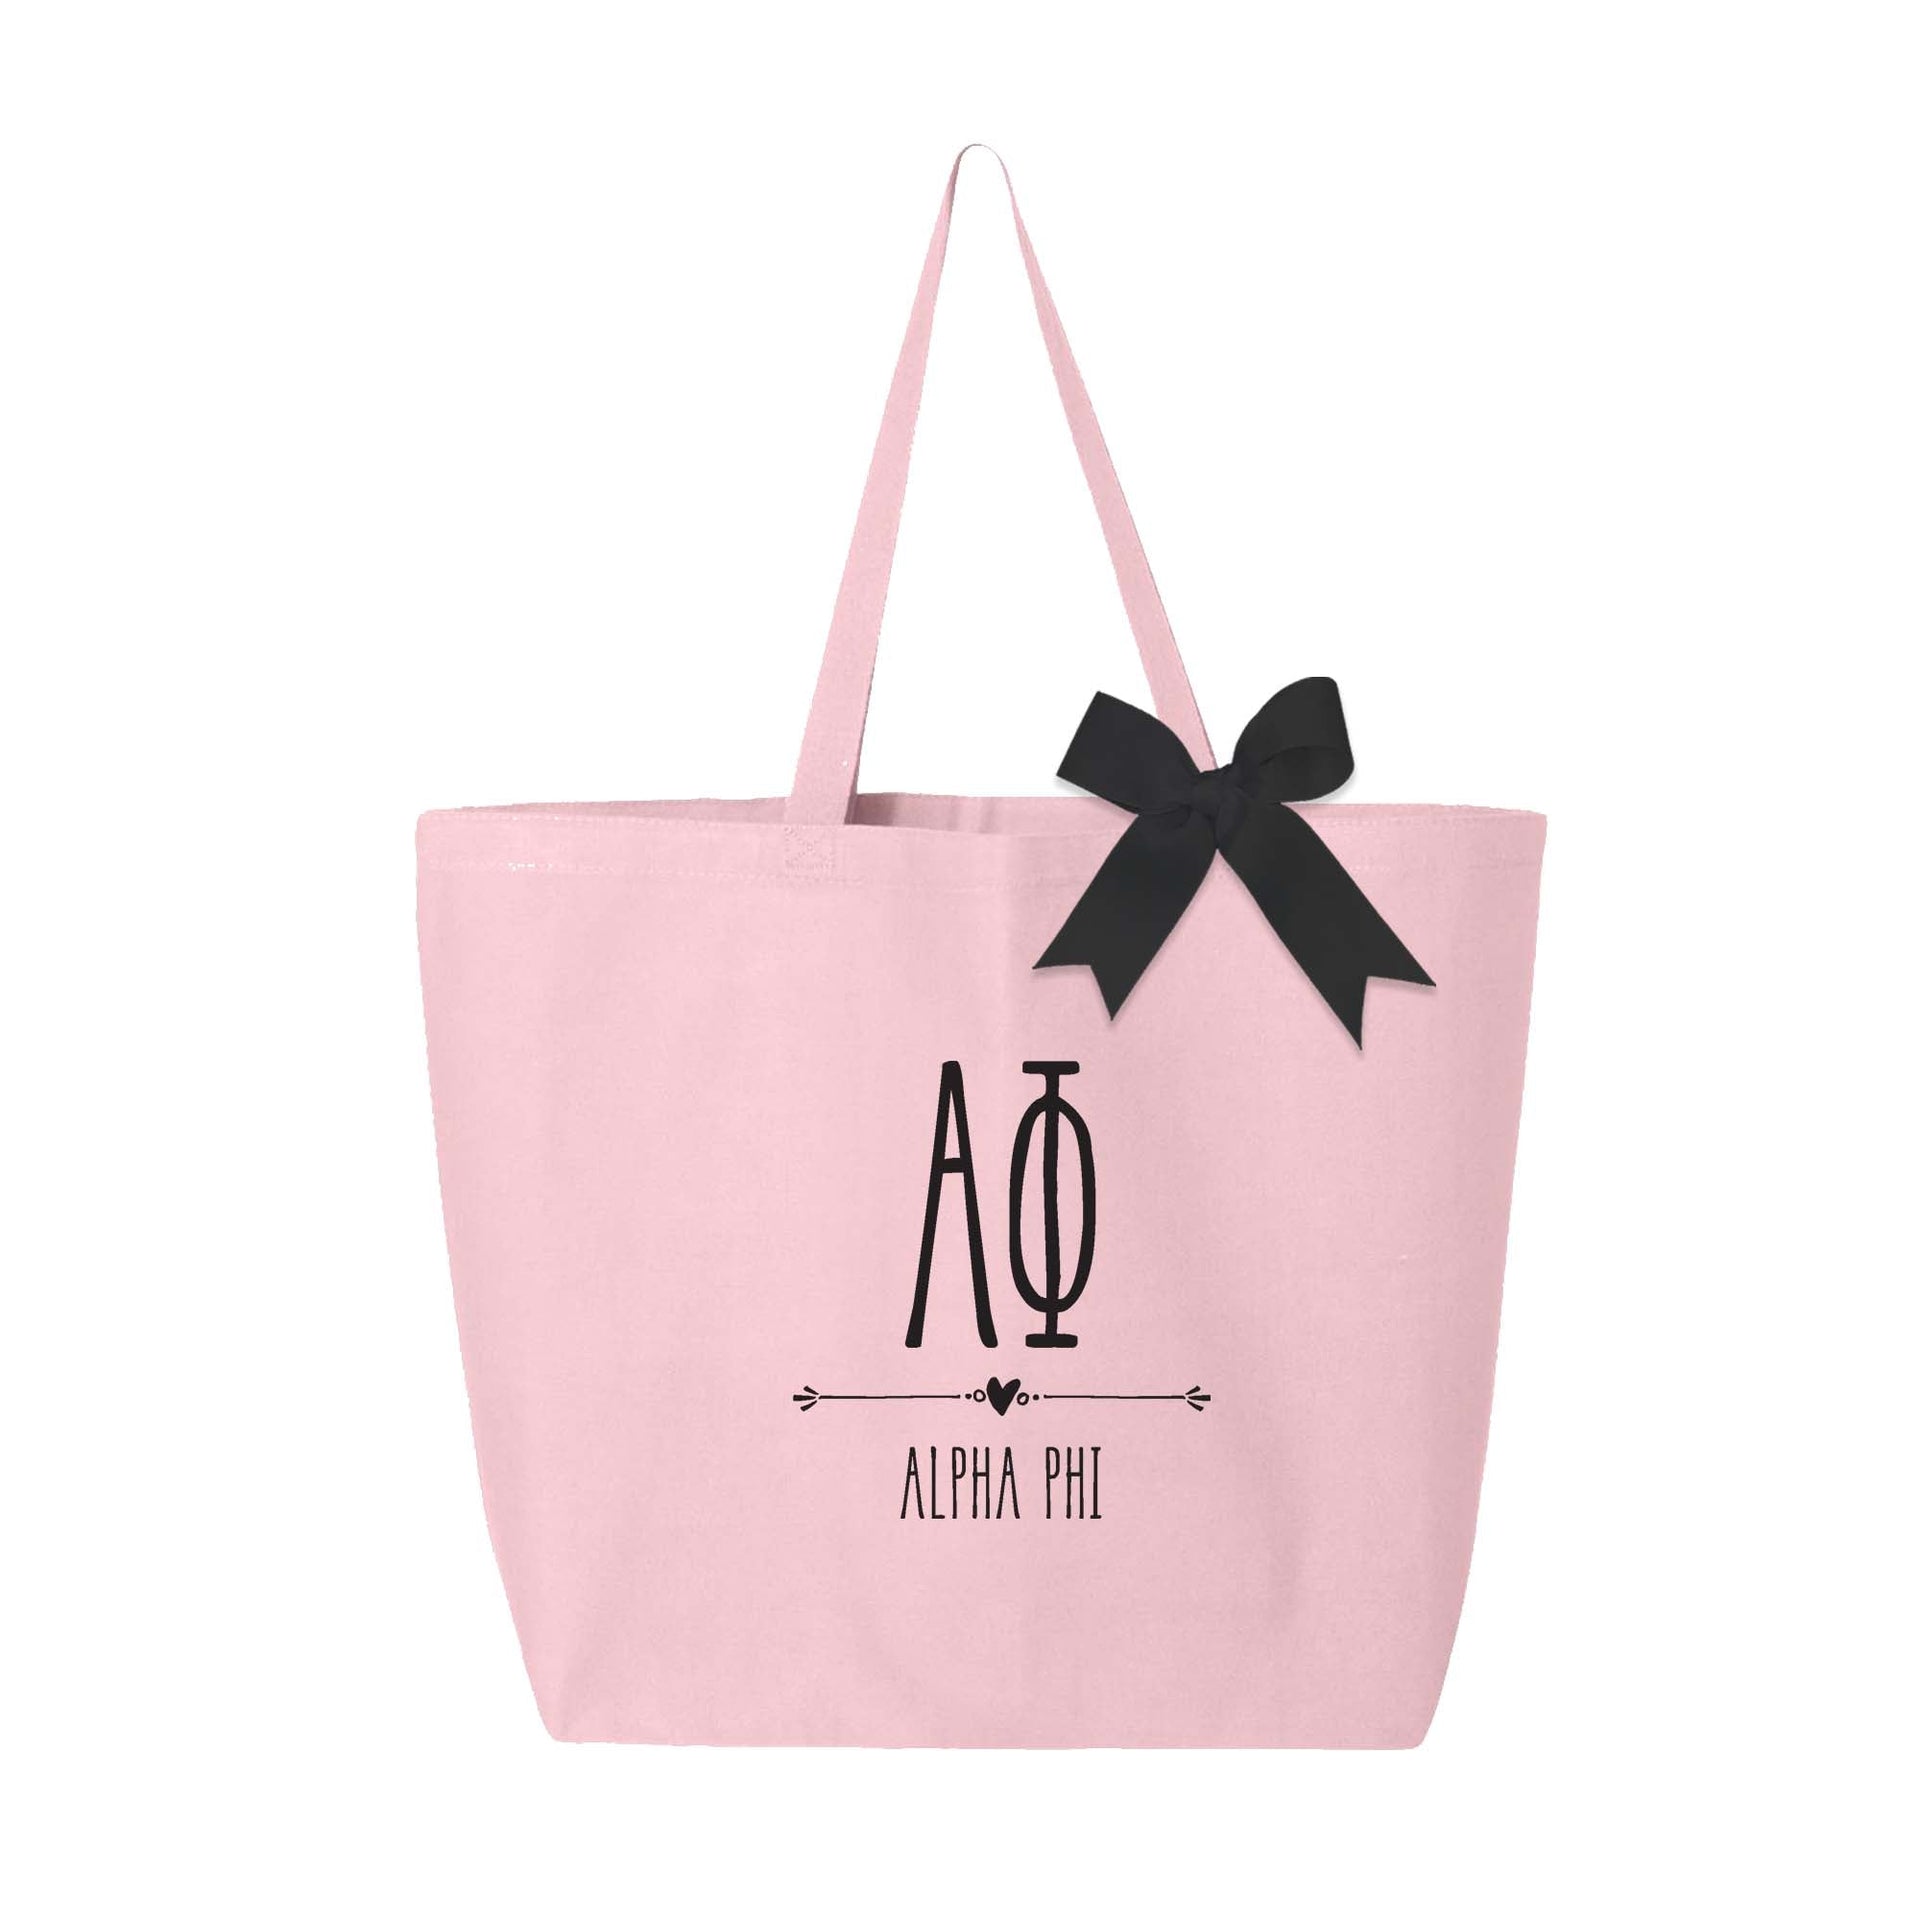 Alpha Phi sorority name and letters custom printed on pink canvas tote bag